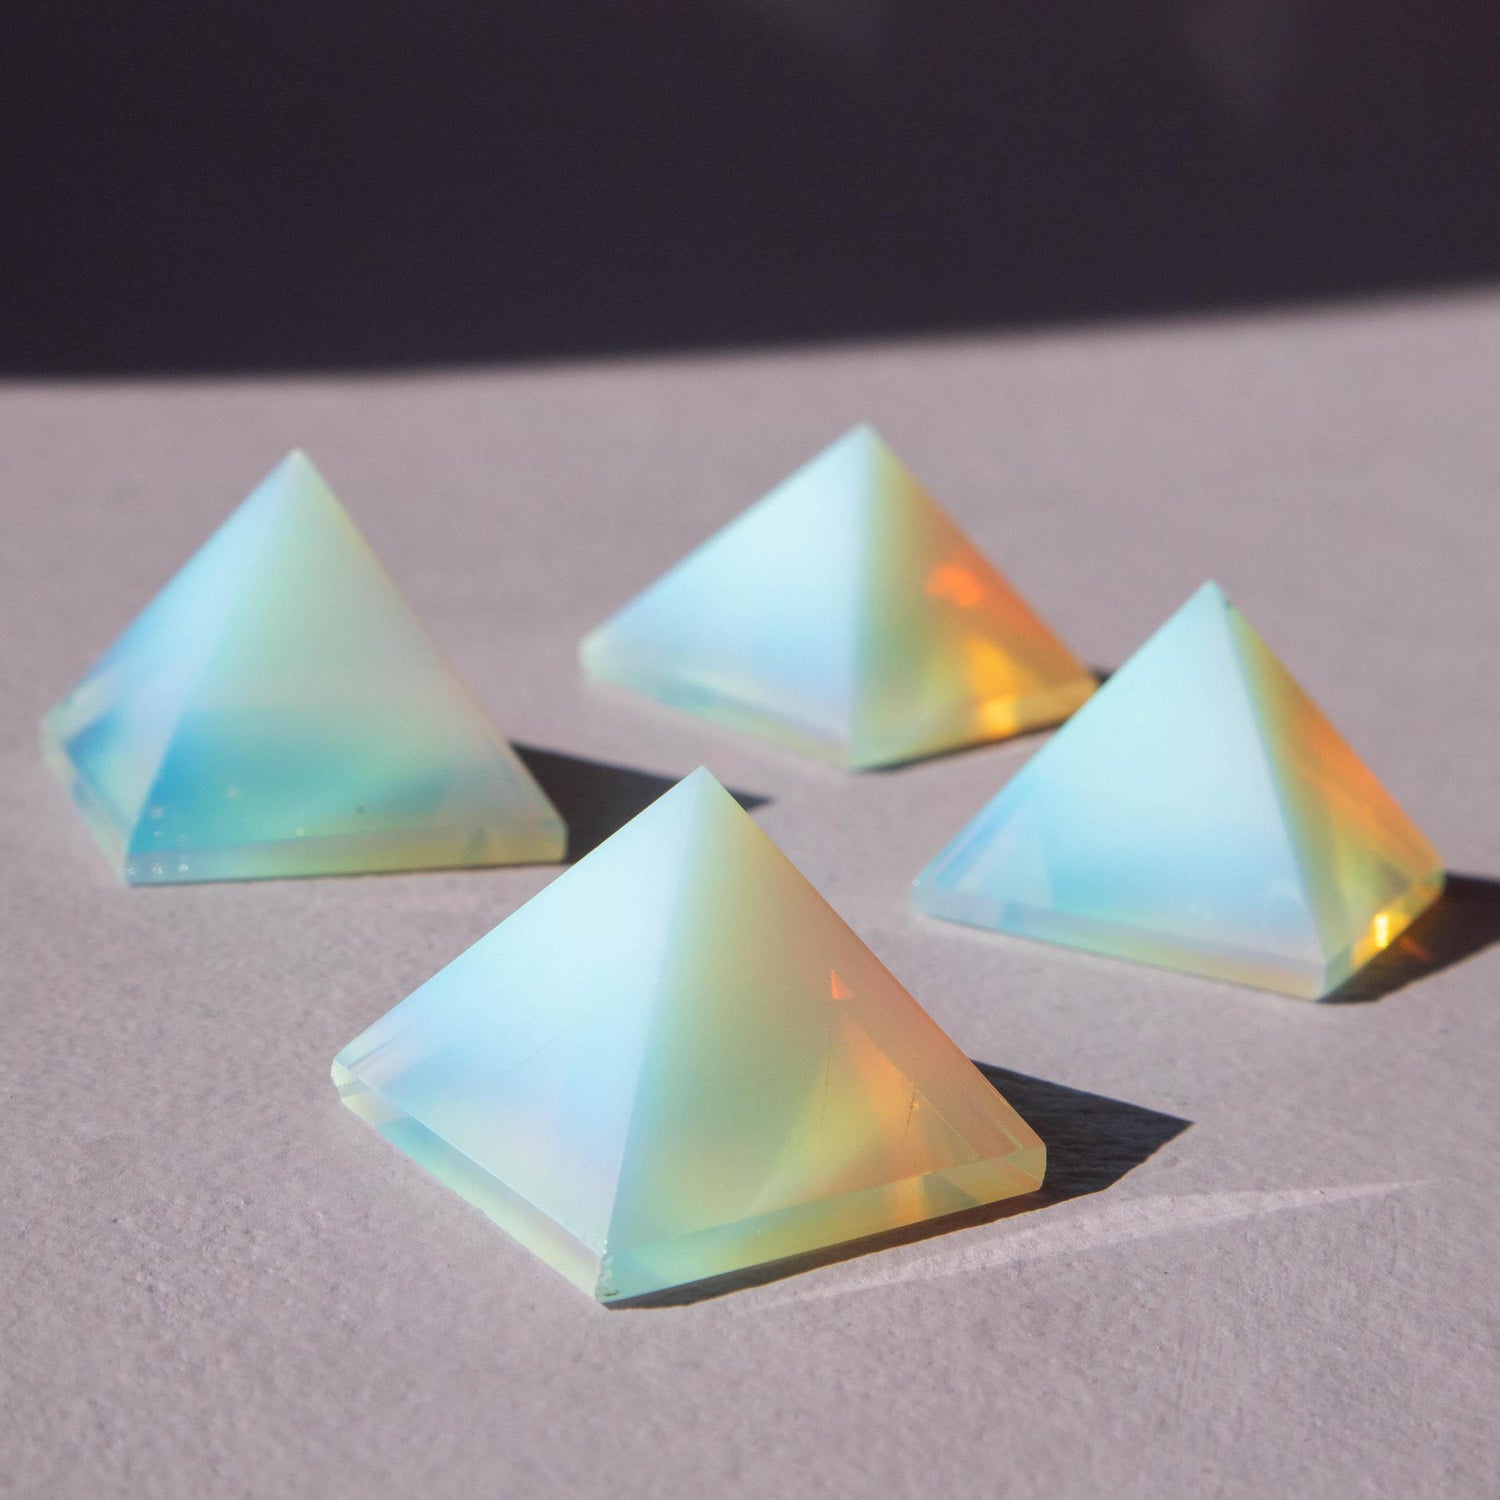 opalite, opalite pyramid, crystal pyramid, opalite crystal, opalite stone, opalite properties, opalite healing properties, opalite metaphysical properties, opalite meaning